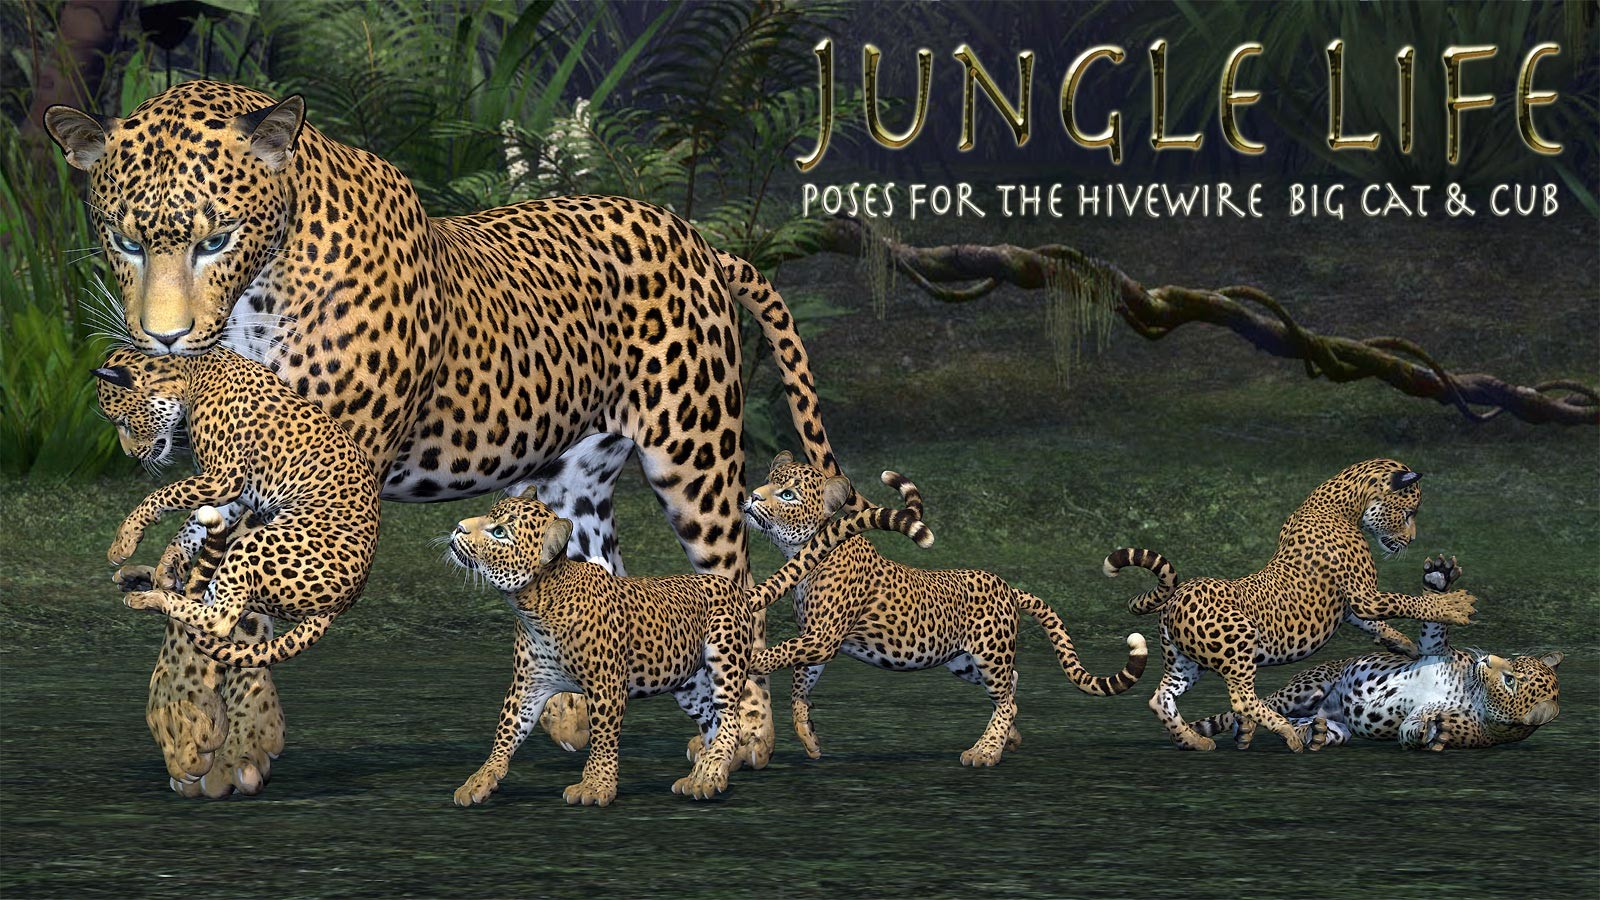 Jungle Life Poses for the HW Big Cat and Cub